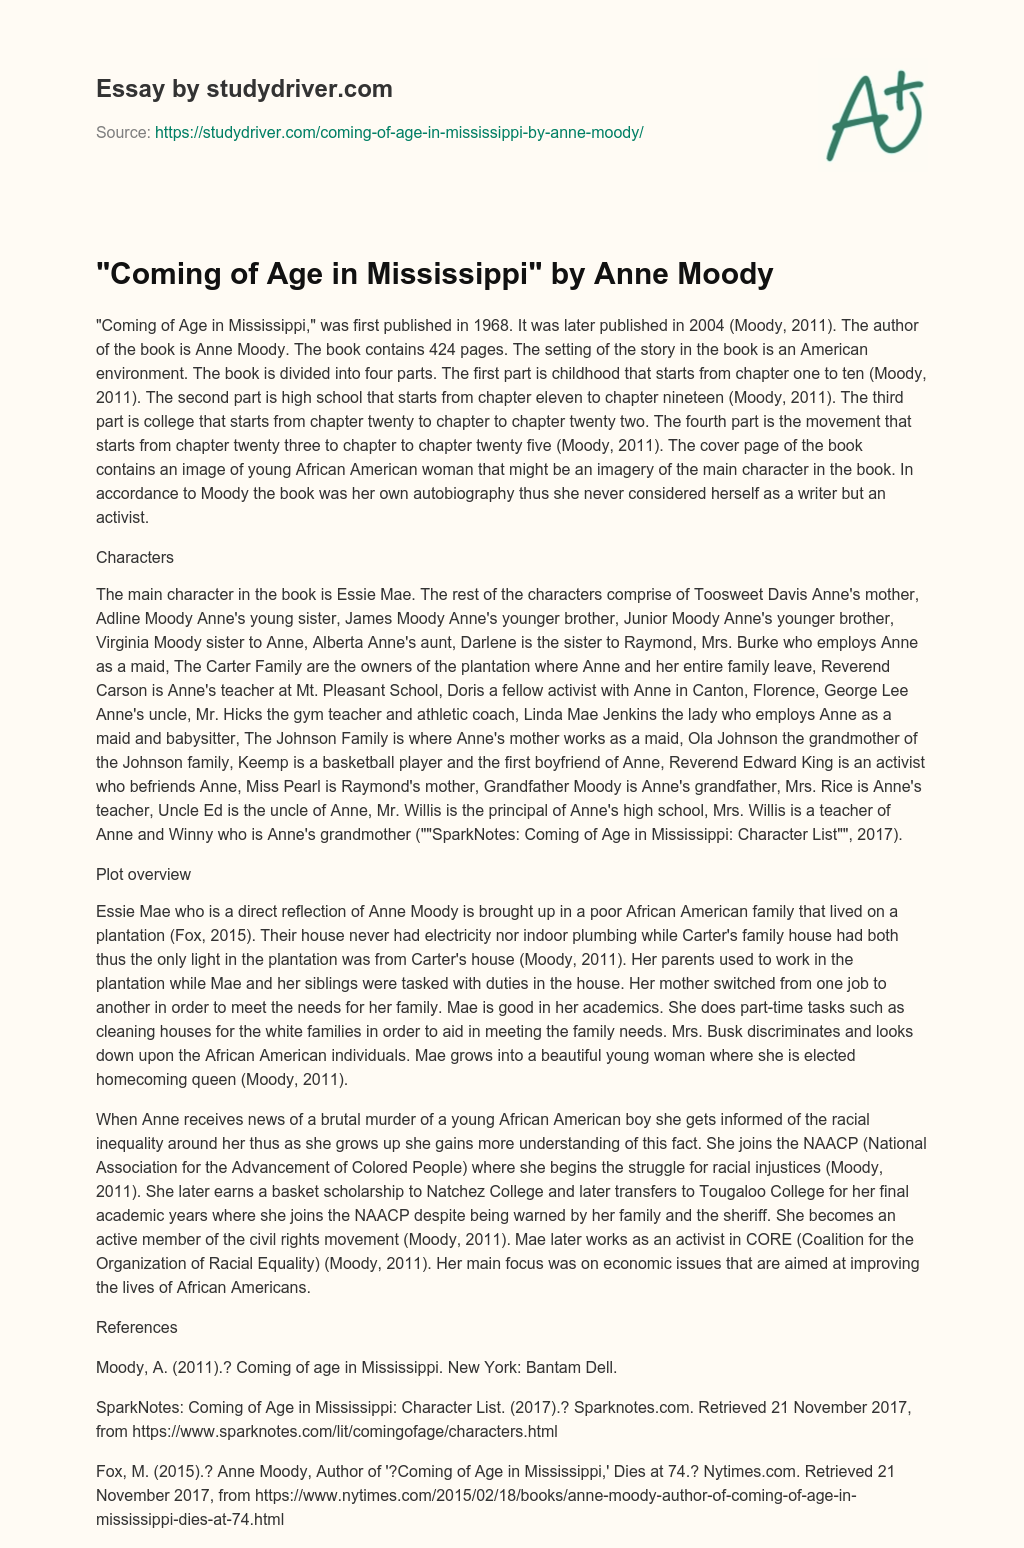 “Coming of Age in Mississippi” by Anne Moody essay